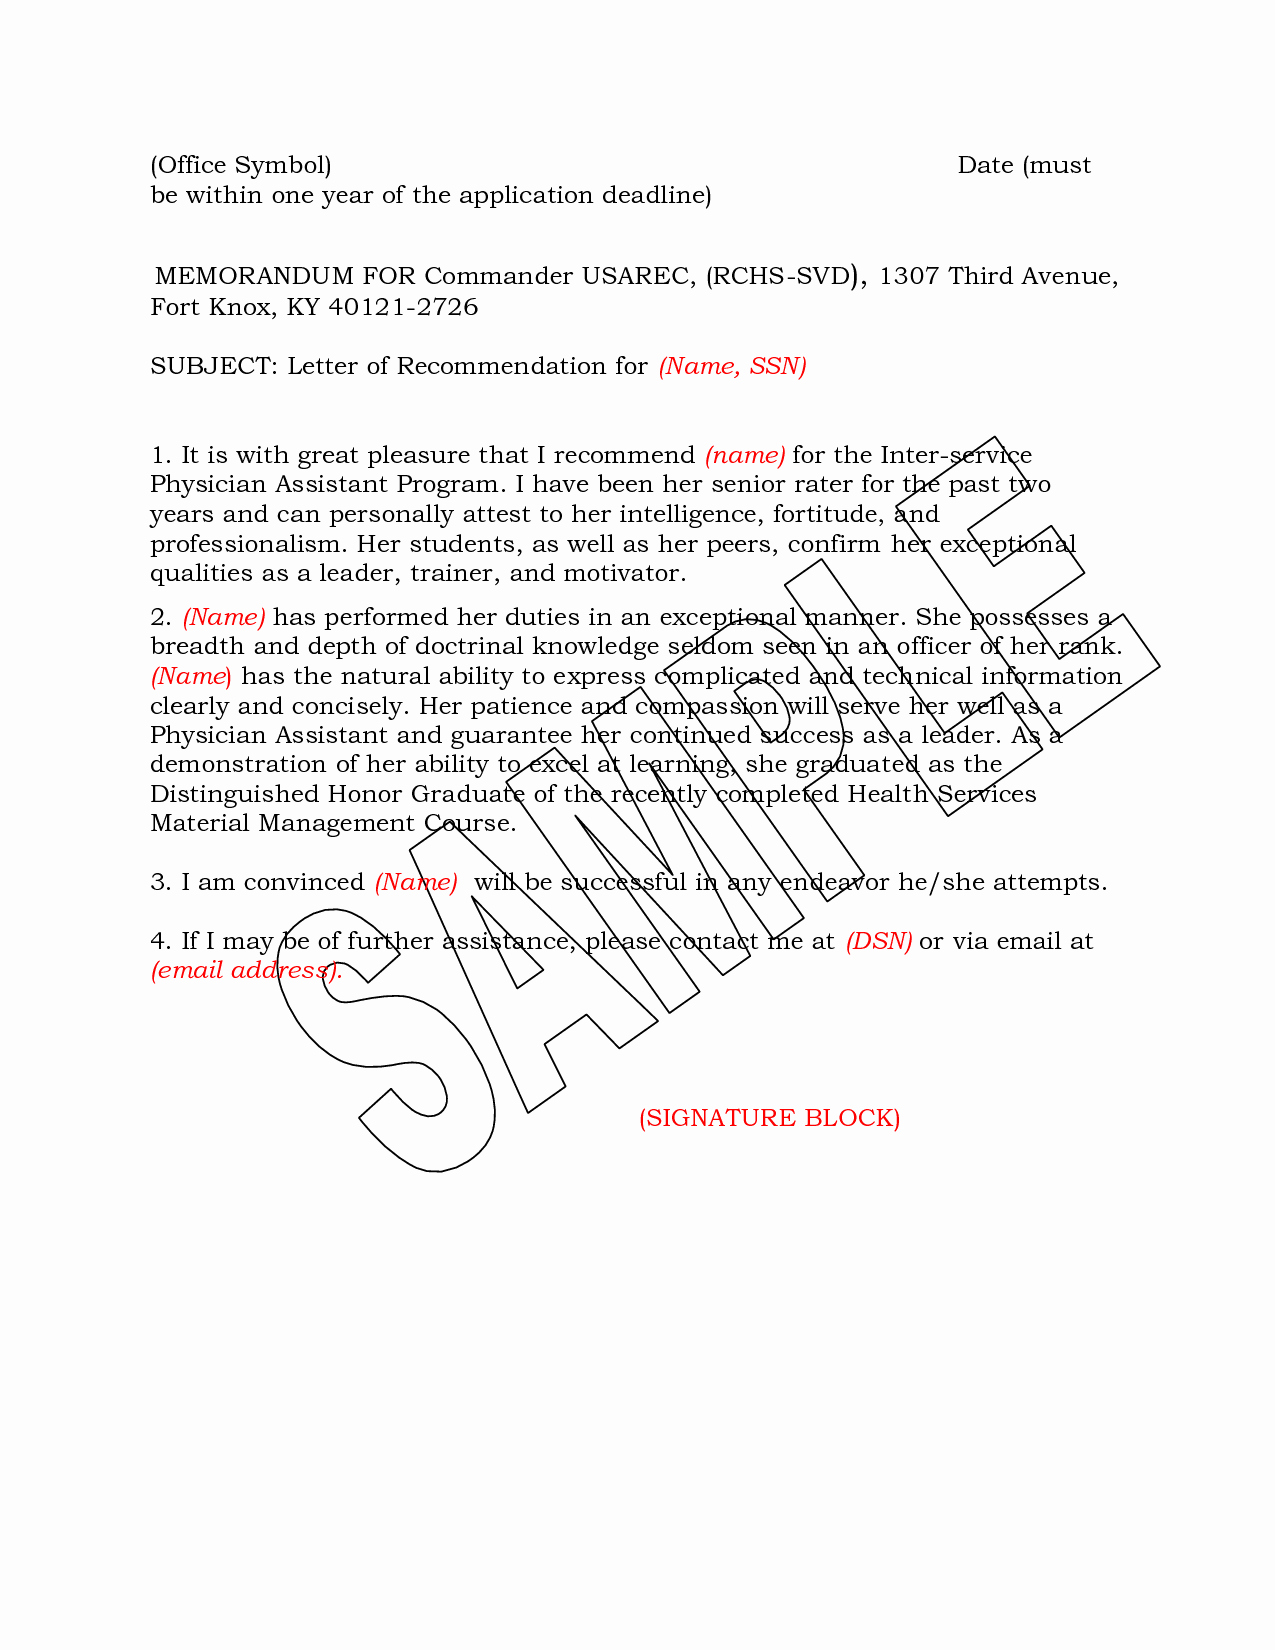 Naval Academy Recommendation Letter New Sample Letter Of Re Mendation Physician Re Mendation